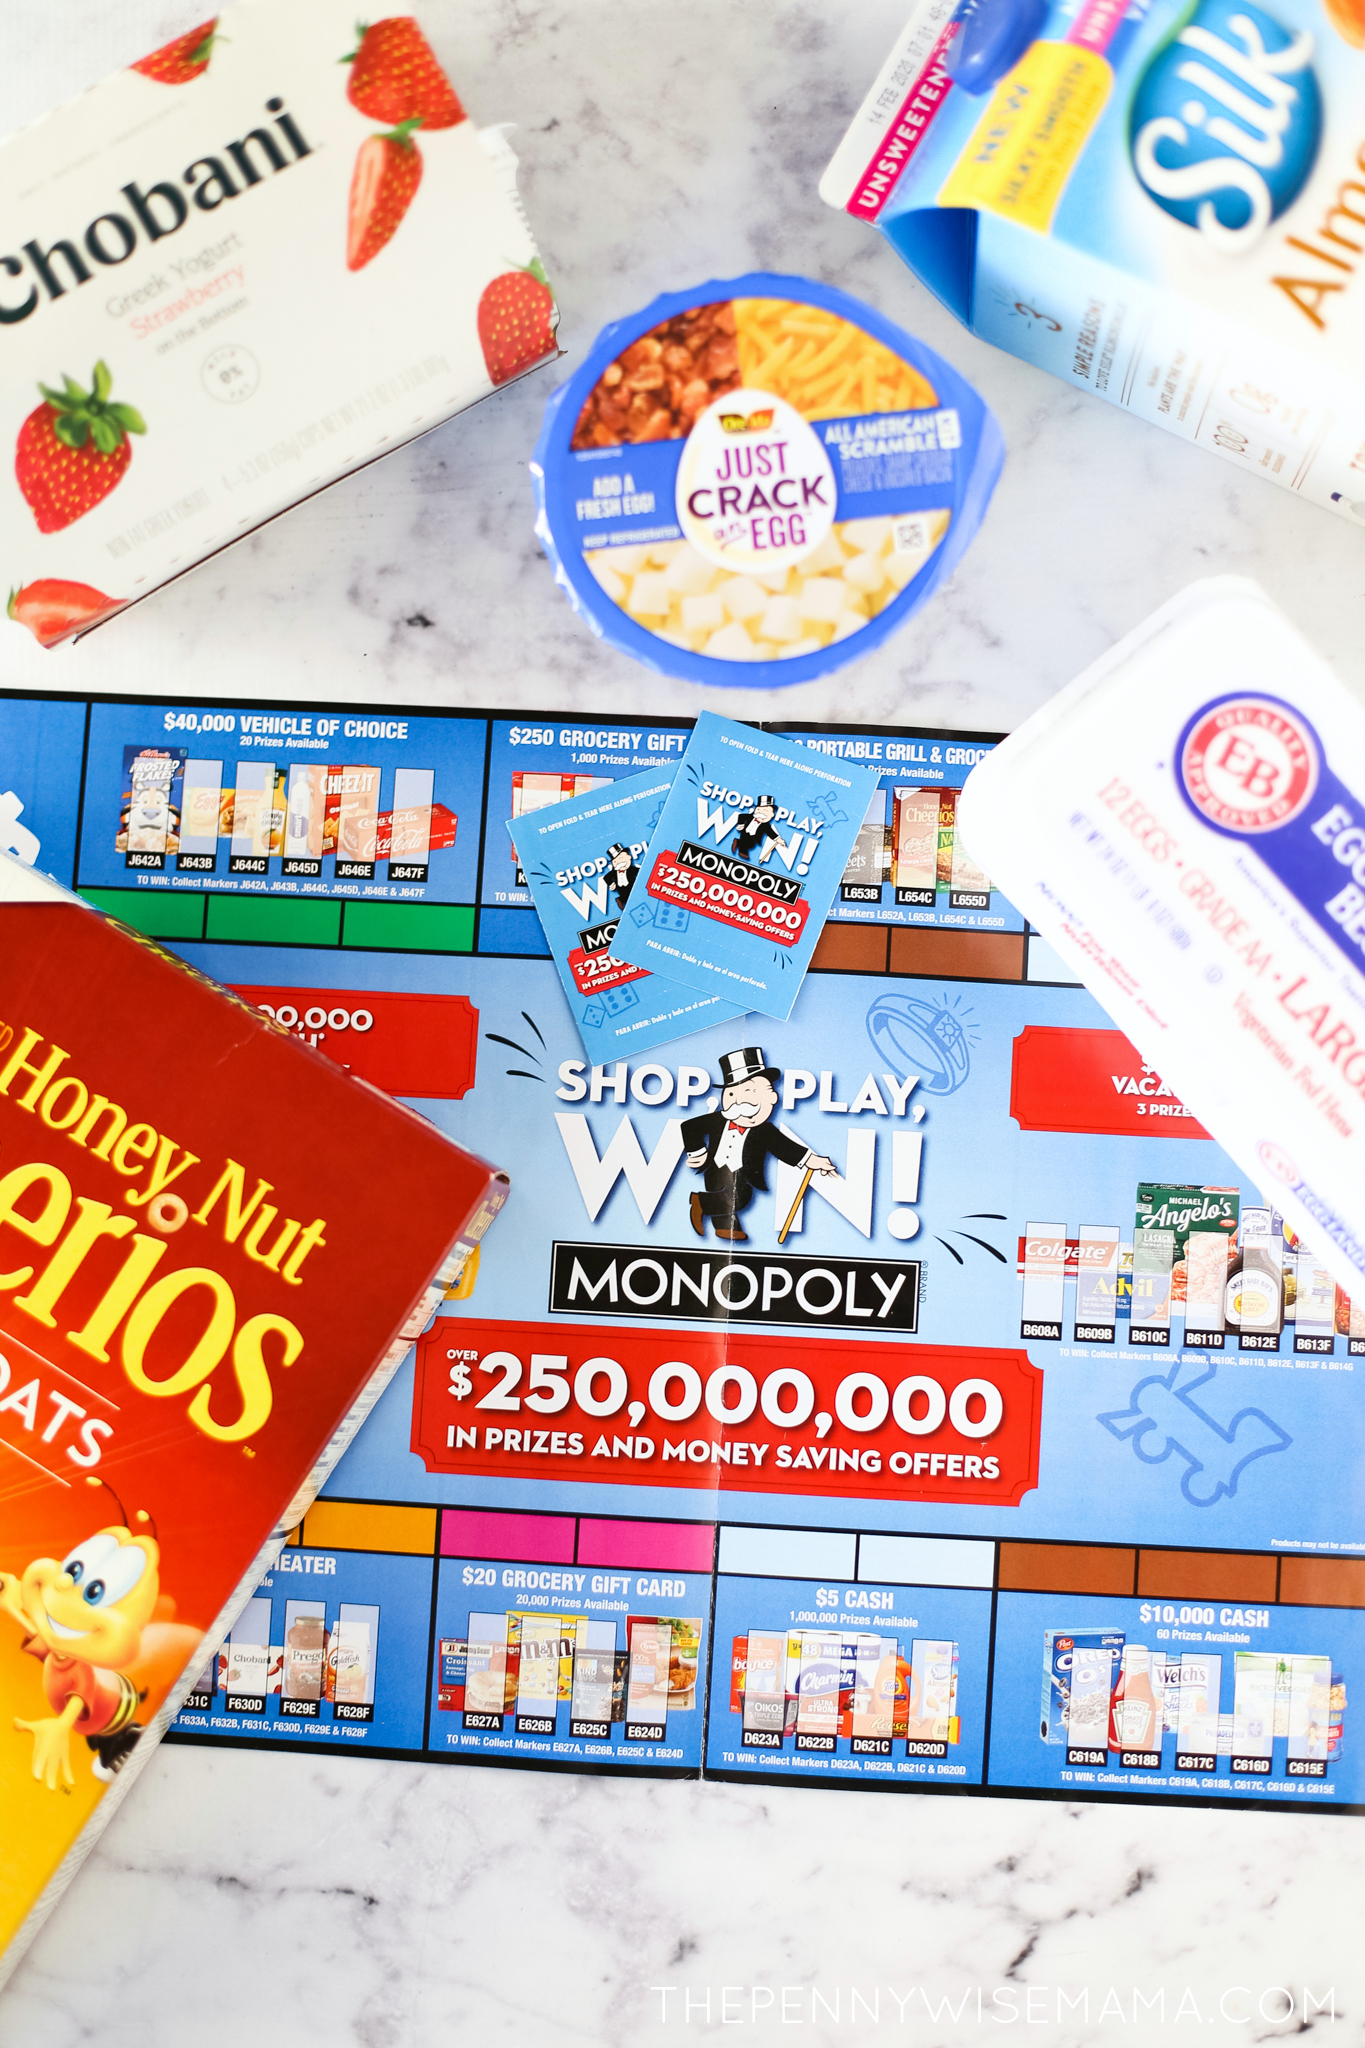 Why You Need to Play Shop Play Win Monopoly at Safeway